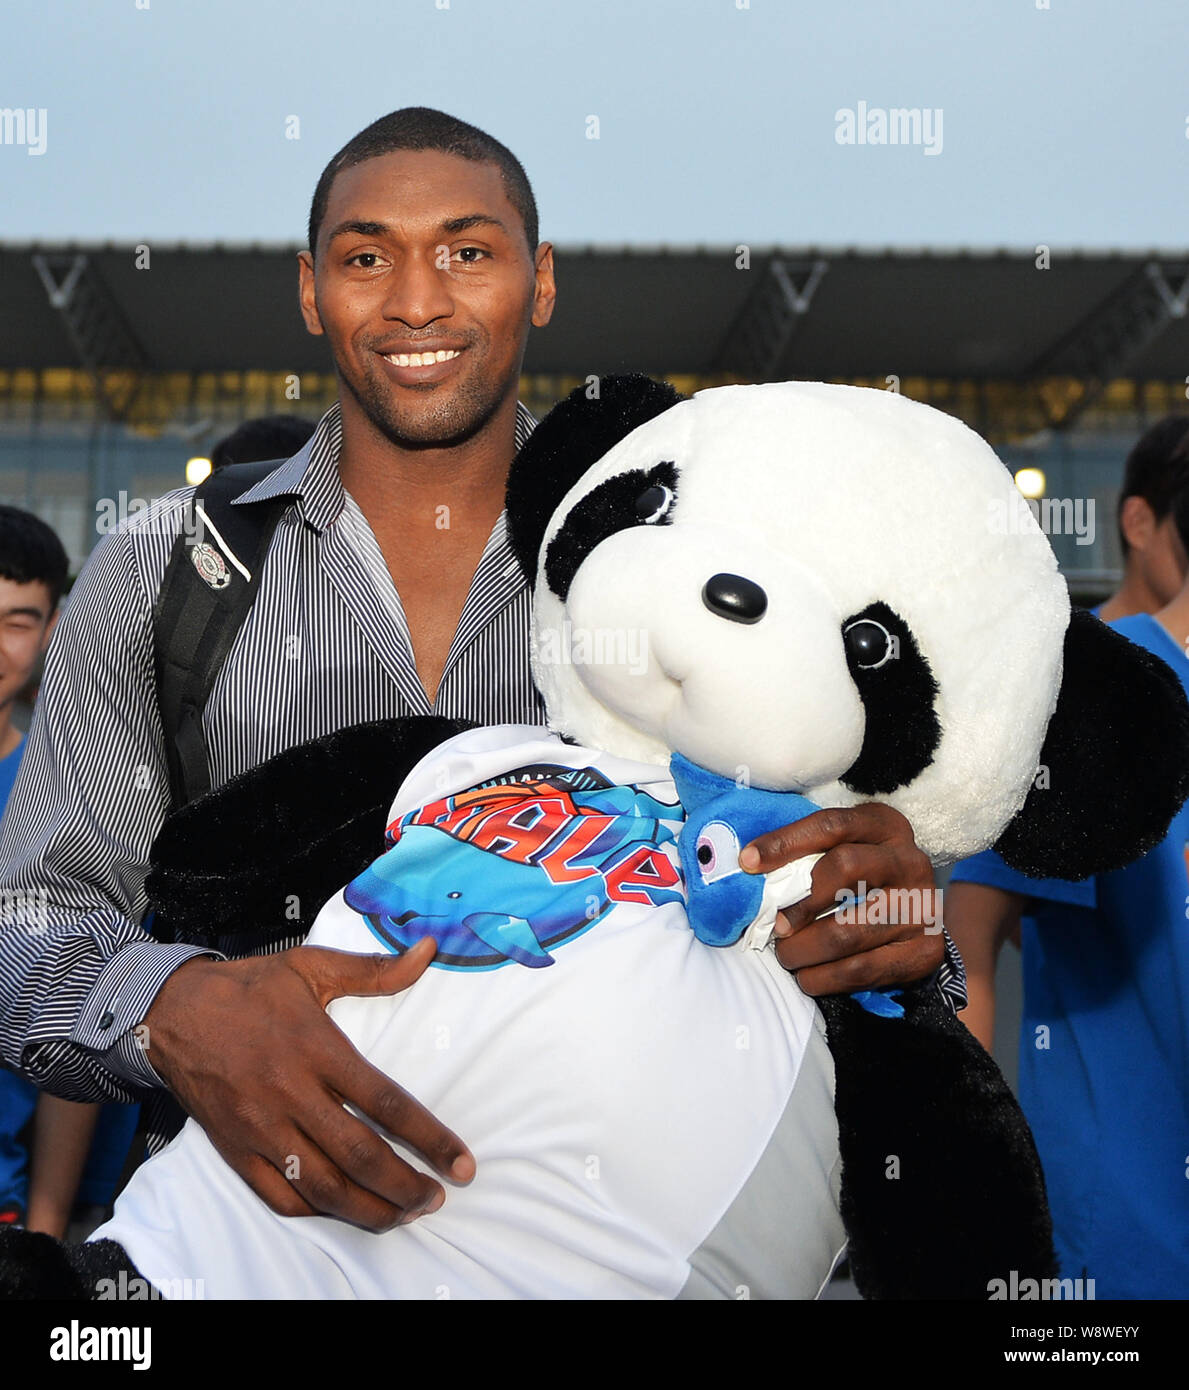 Metta World Peace changing name to The Pandas Friend to coincide with move  to Chinese Basketball Association – New York Daily News